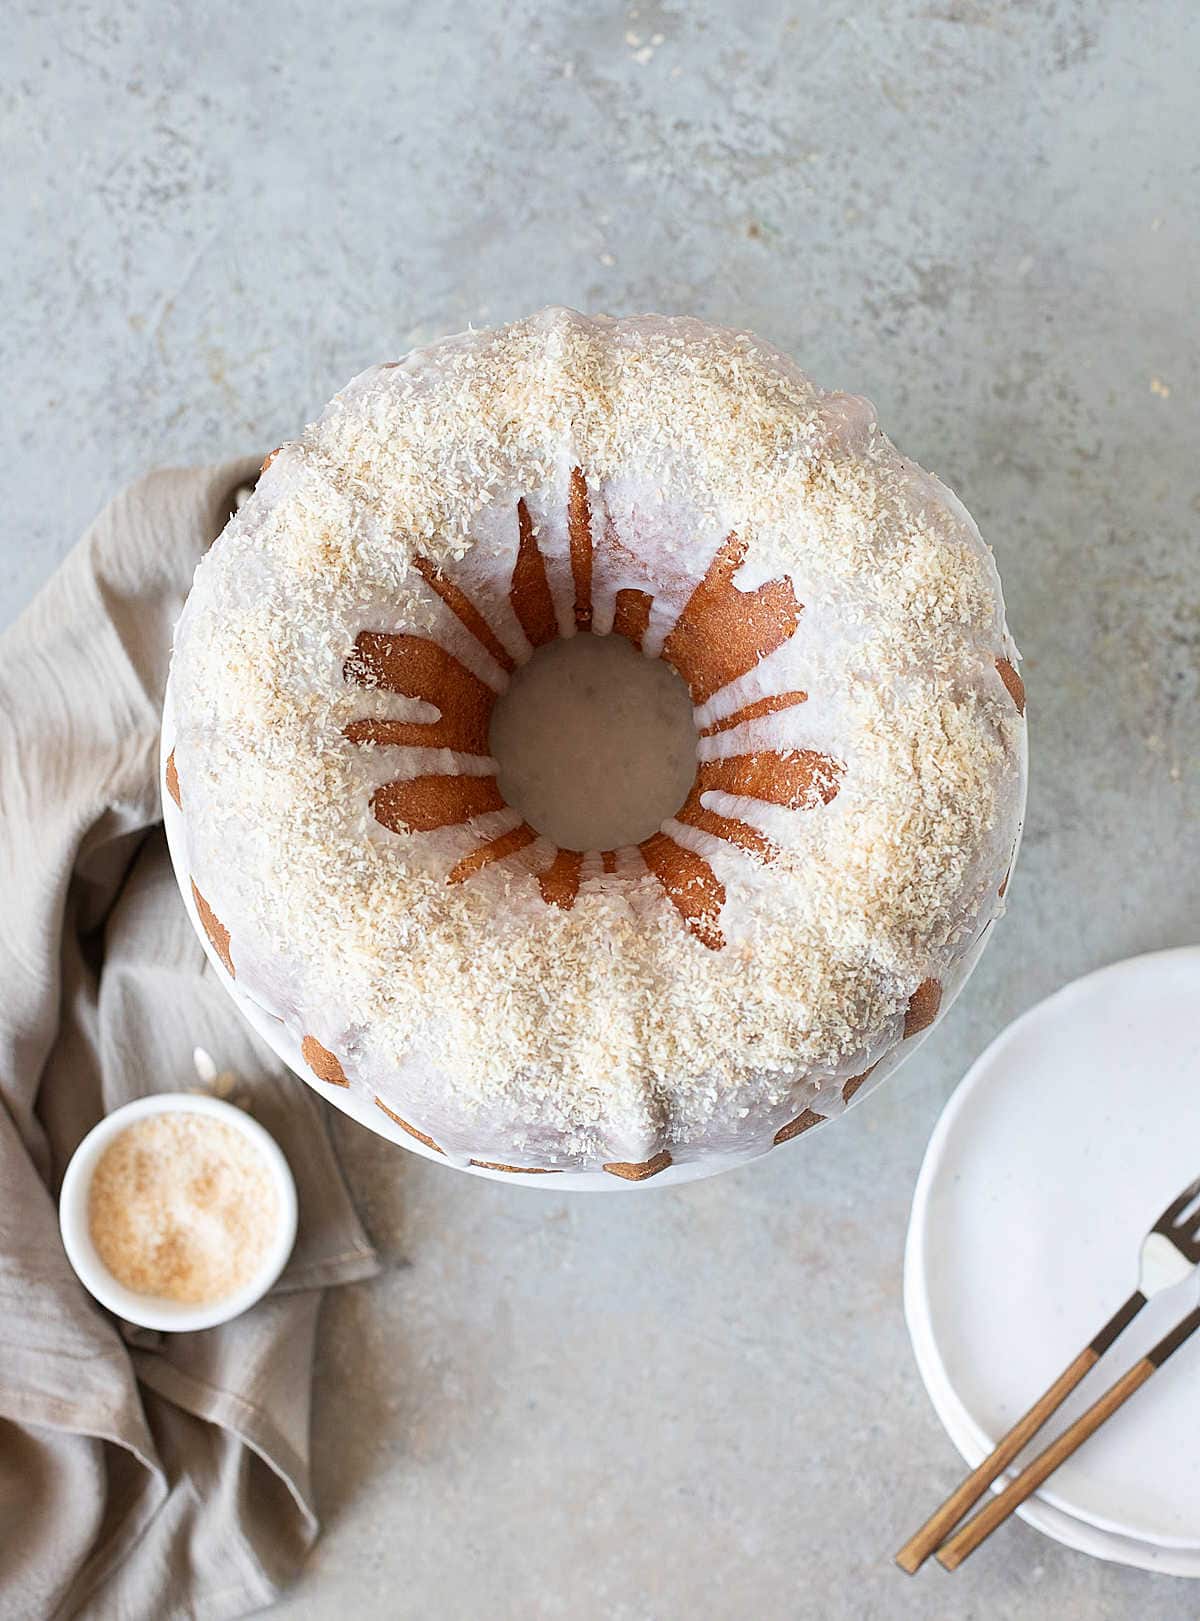 Top view of glazed coconut mango bundt cake. Grey surface, cloth, stack of plates.